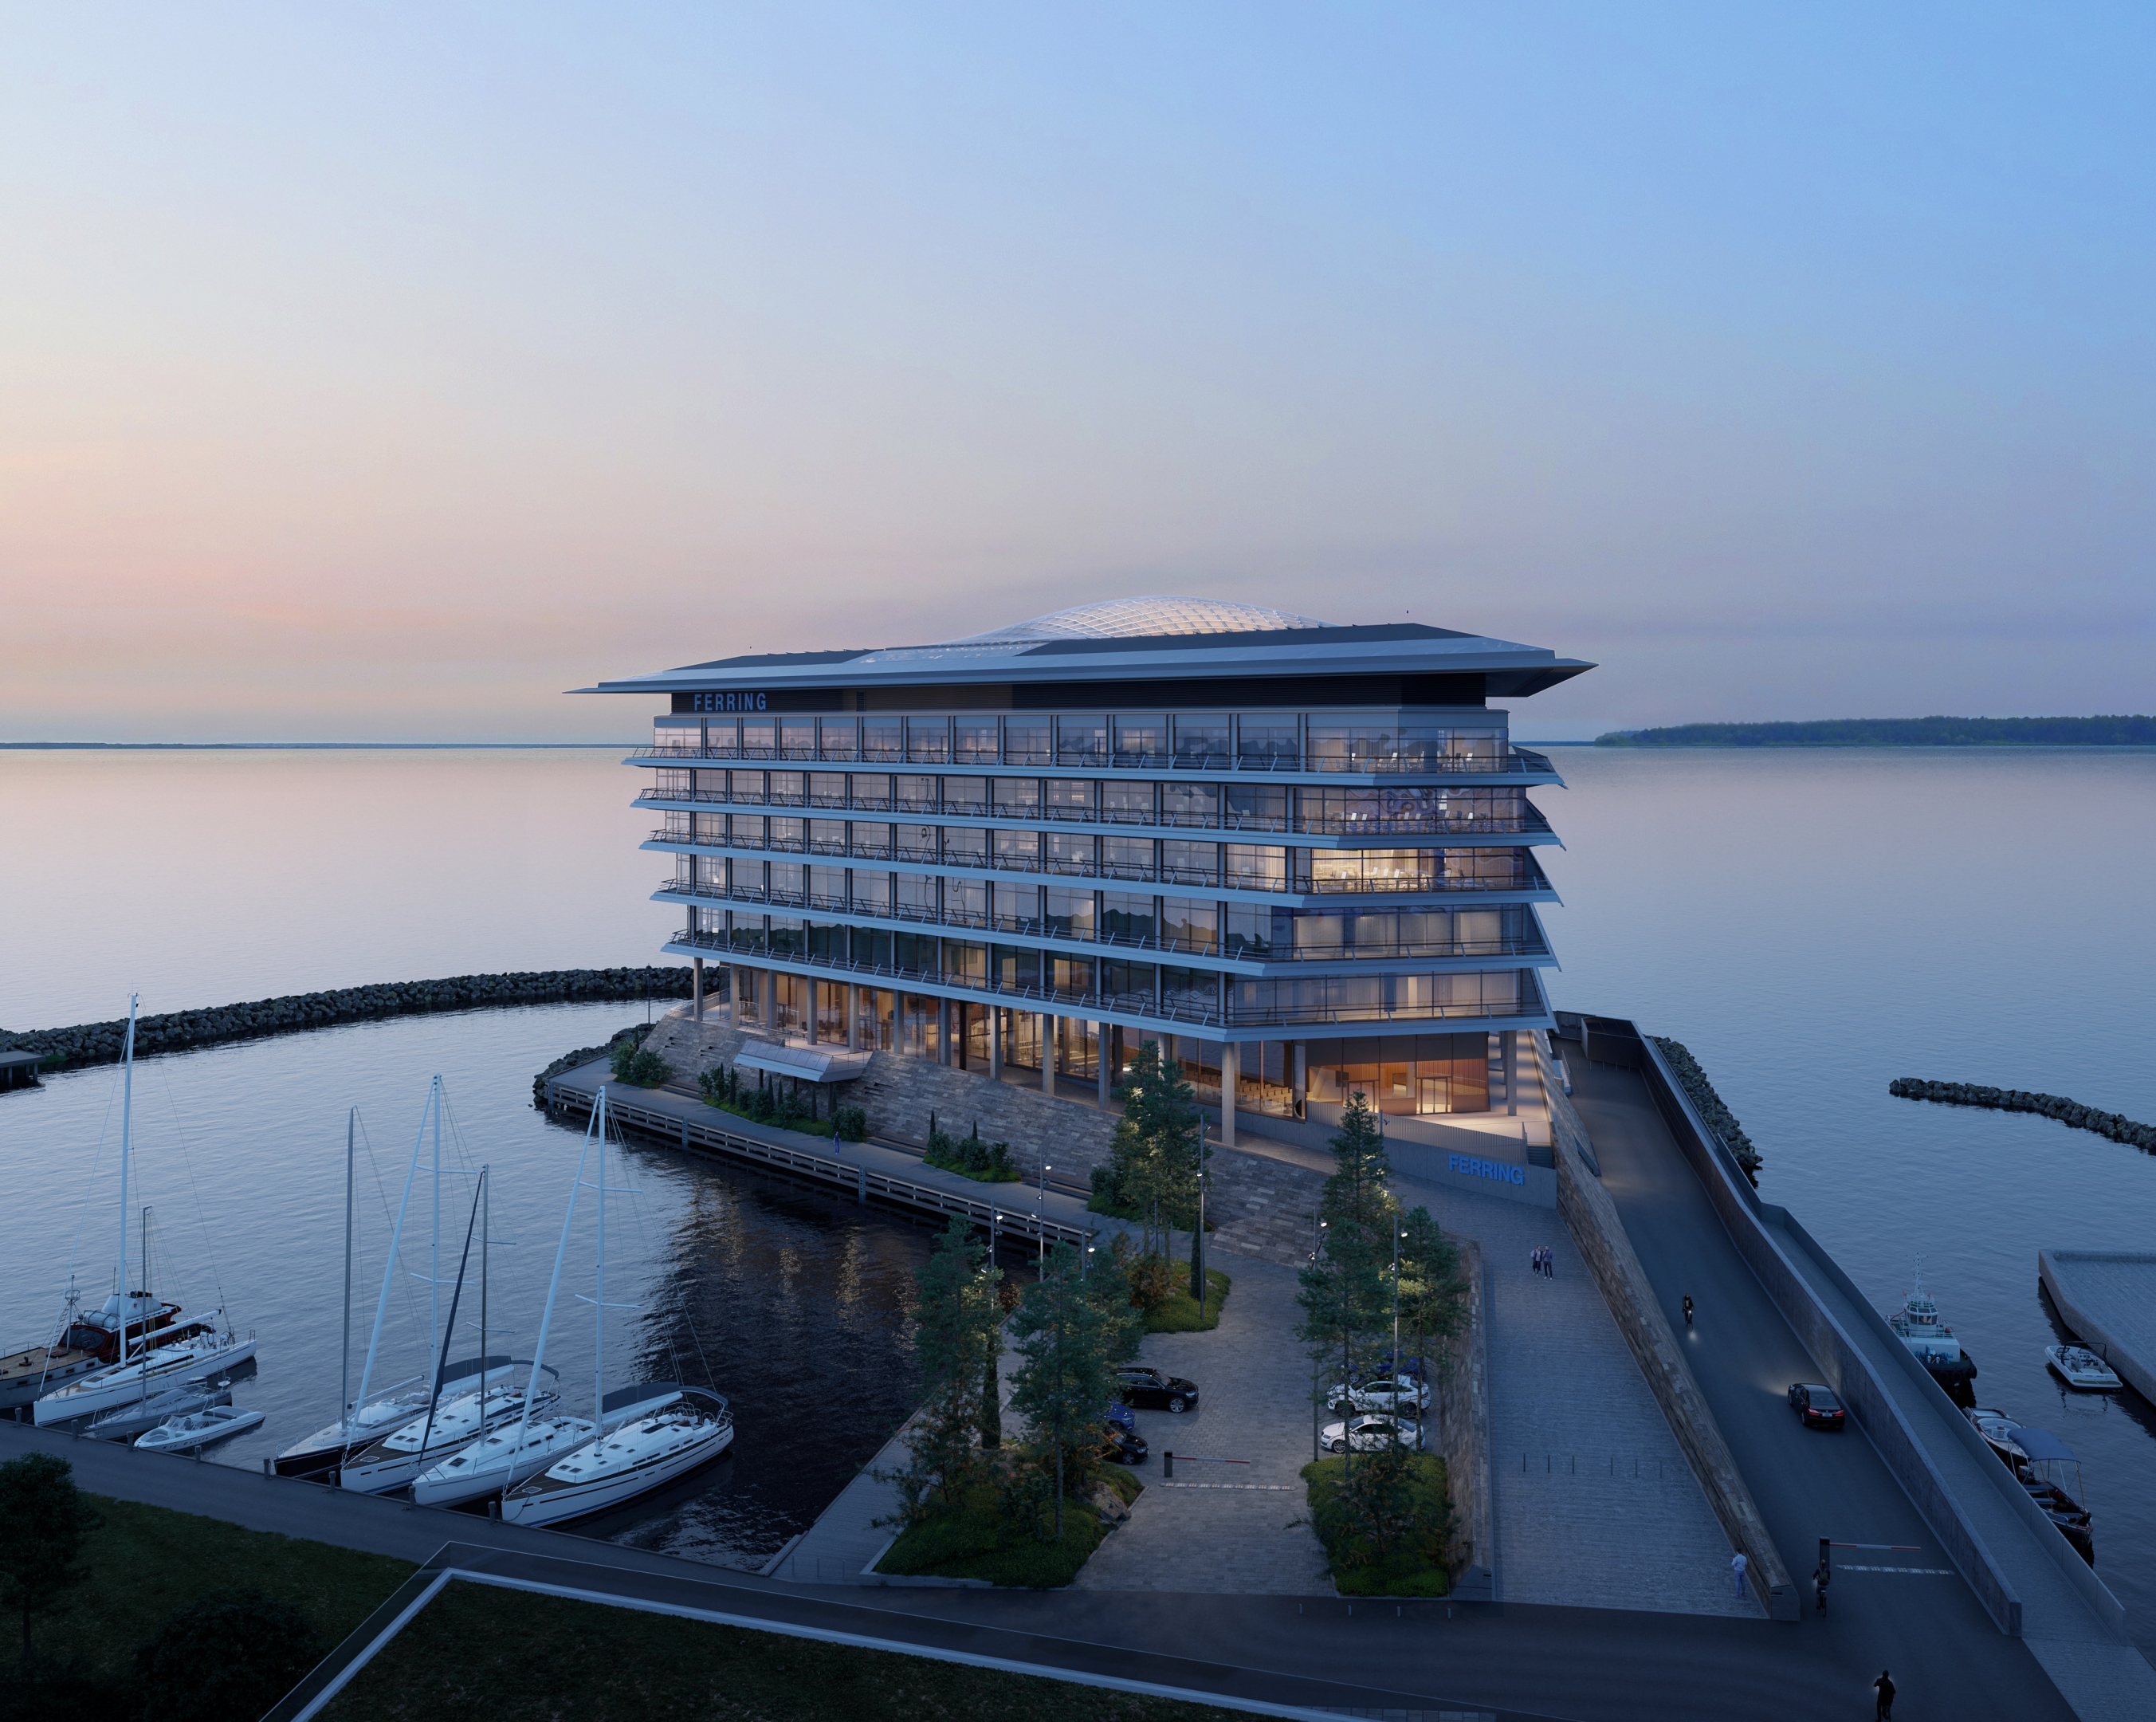 Architectural visualization of Ferring for Foster & Partners. A image of an office building surrounded by ocean in the dusk from a semi aerial view.